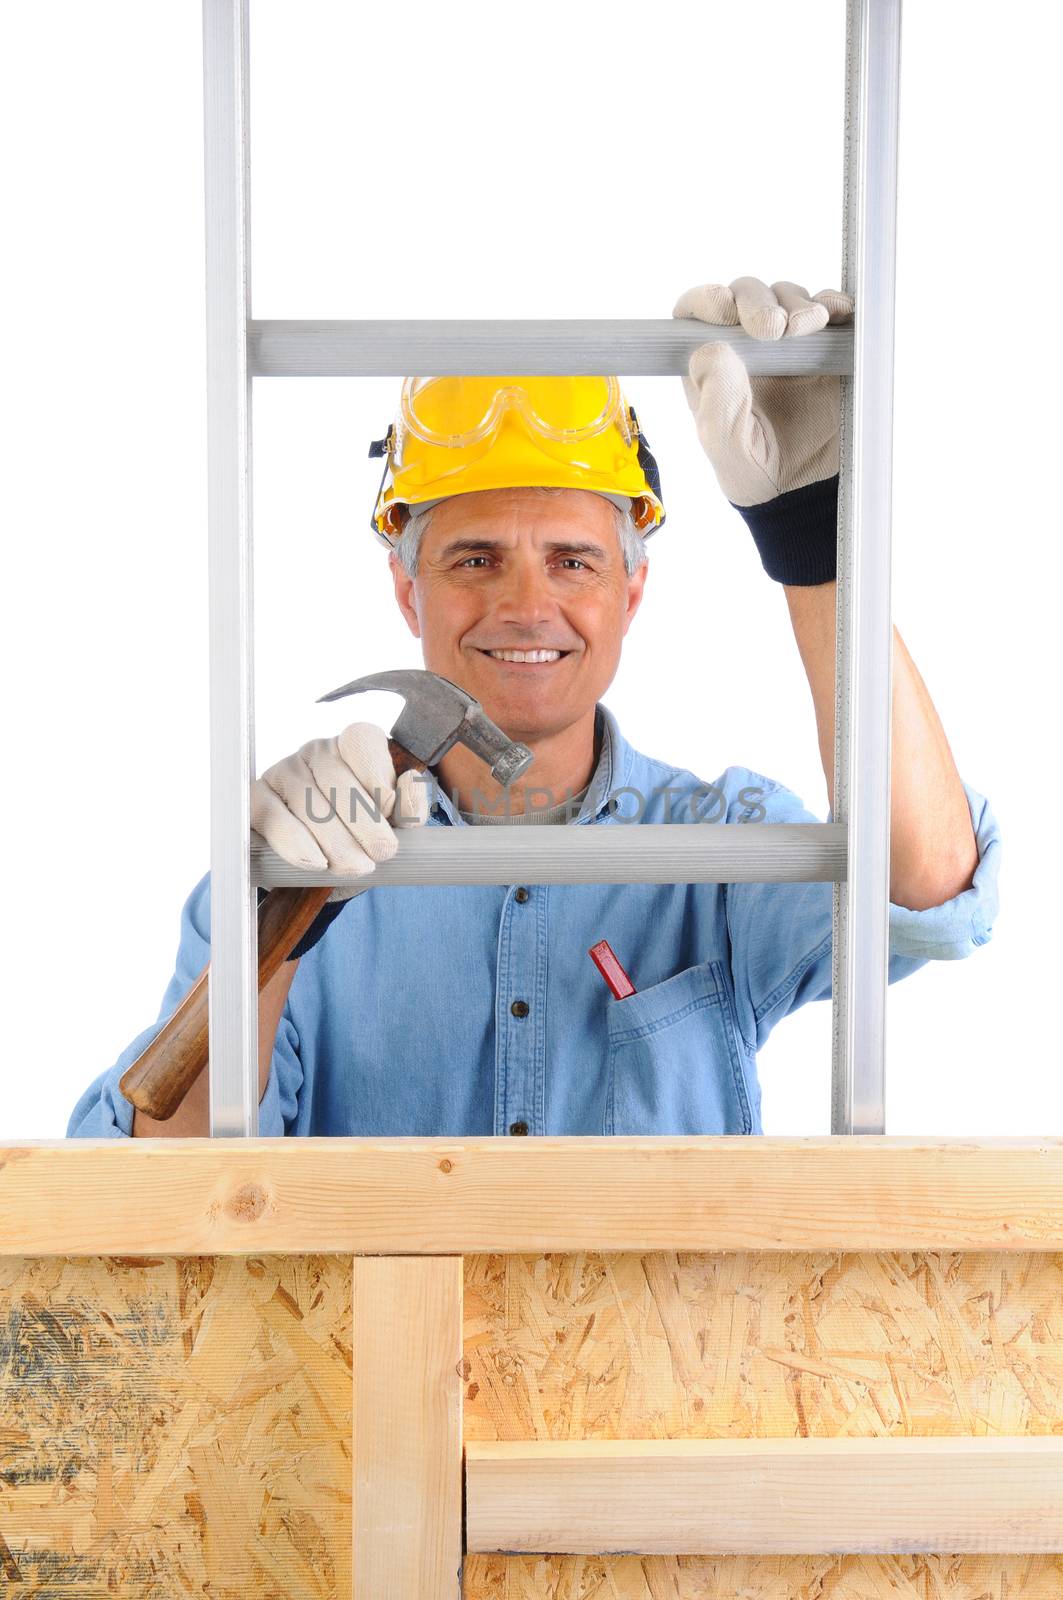 Closeup of  a carpenter climbing a ladder isolated over white. The man wearing a work shirt, jeans, gloves is holding a hammer and is partially hidden behind a wood framed wall. Vertical Format.